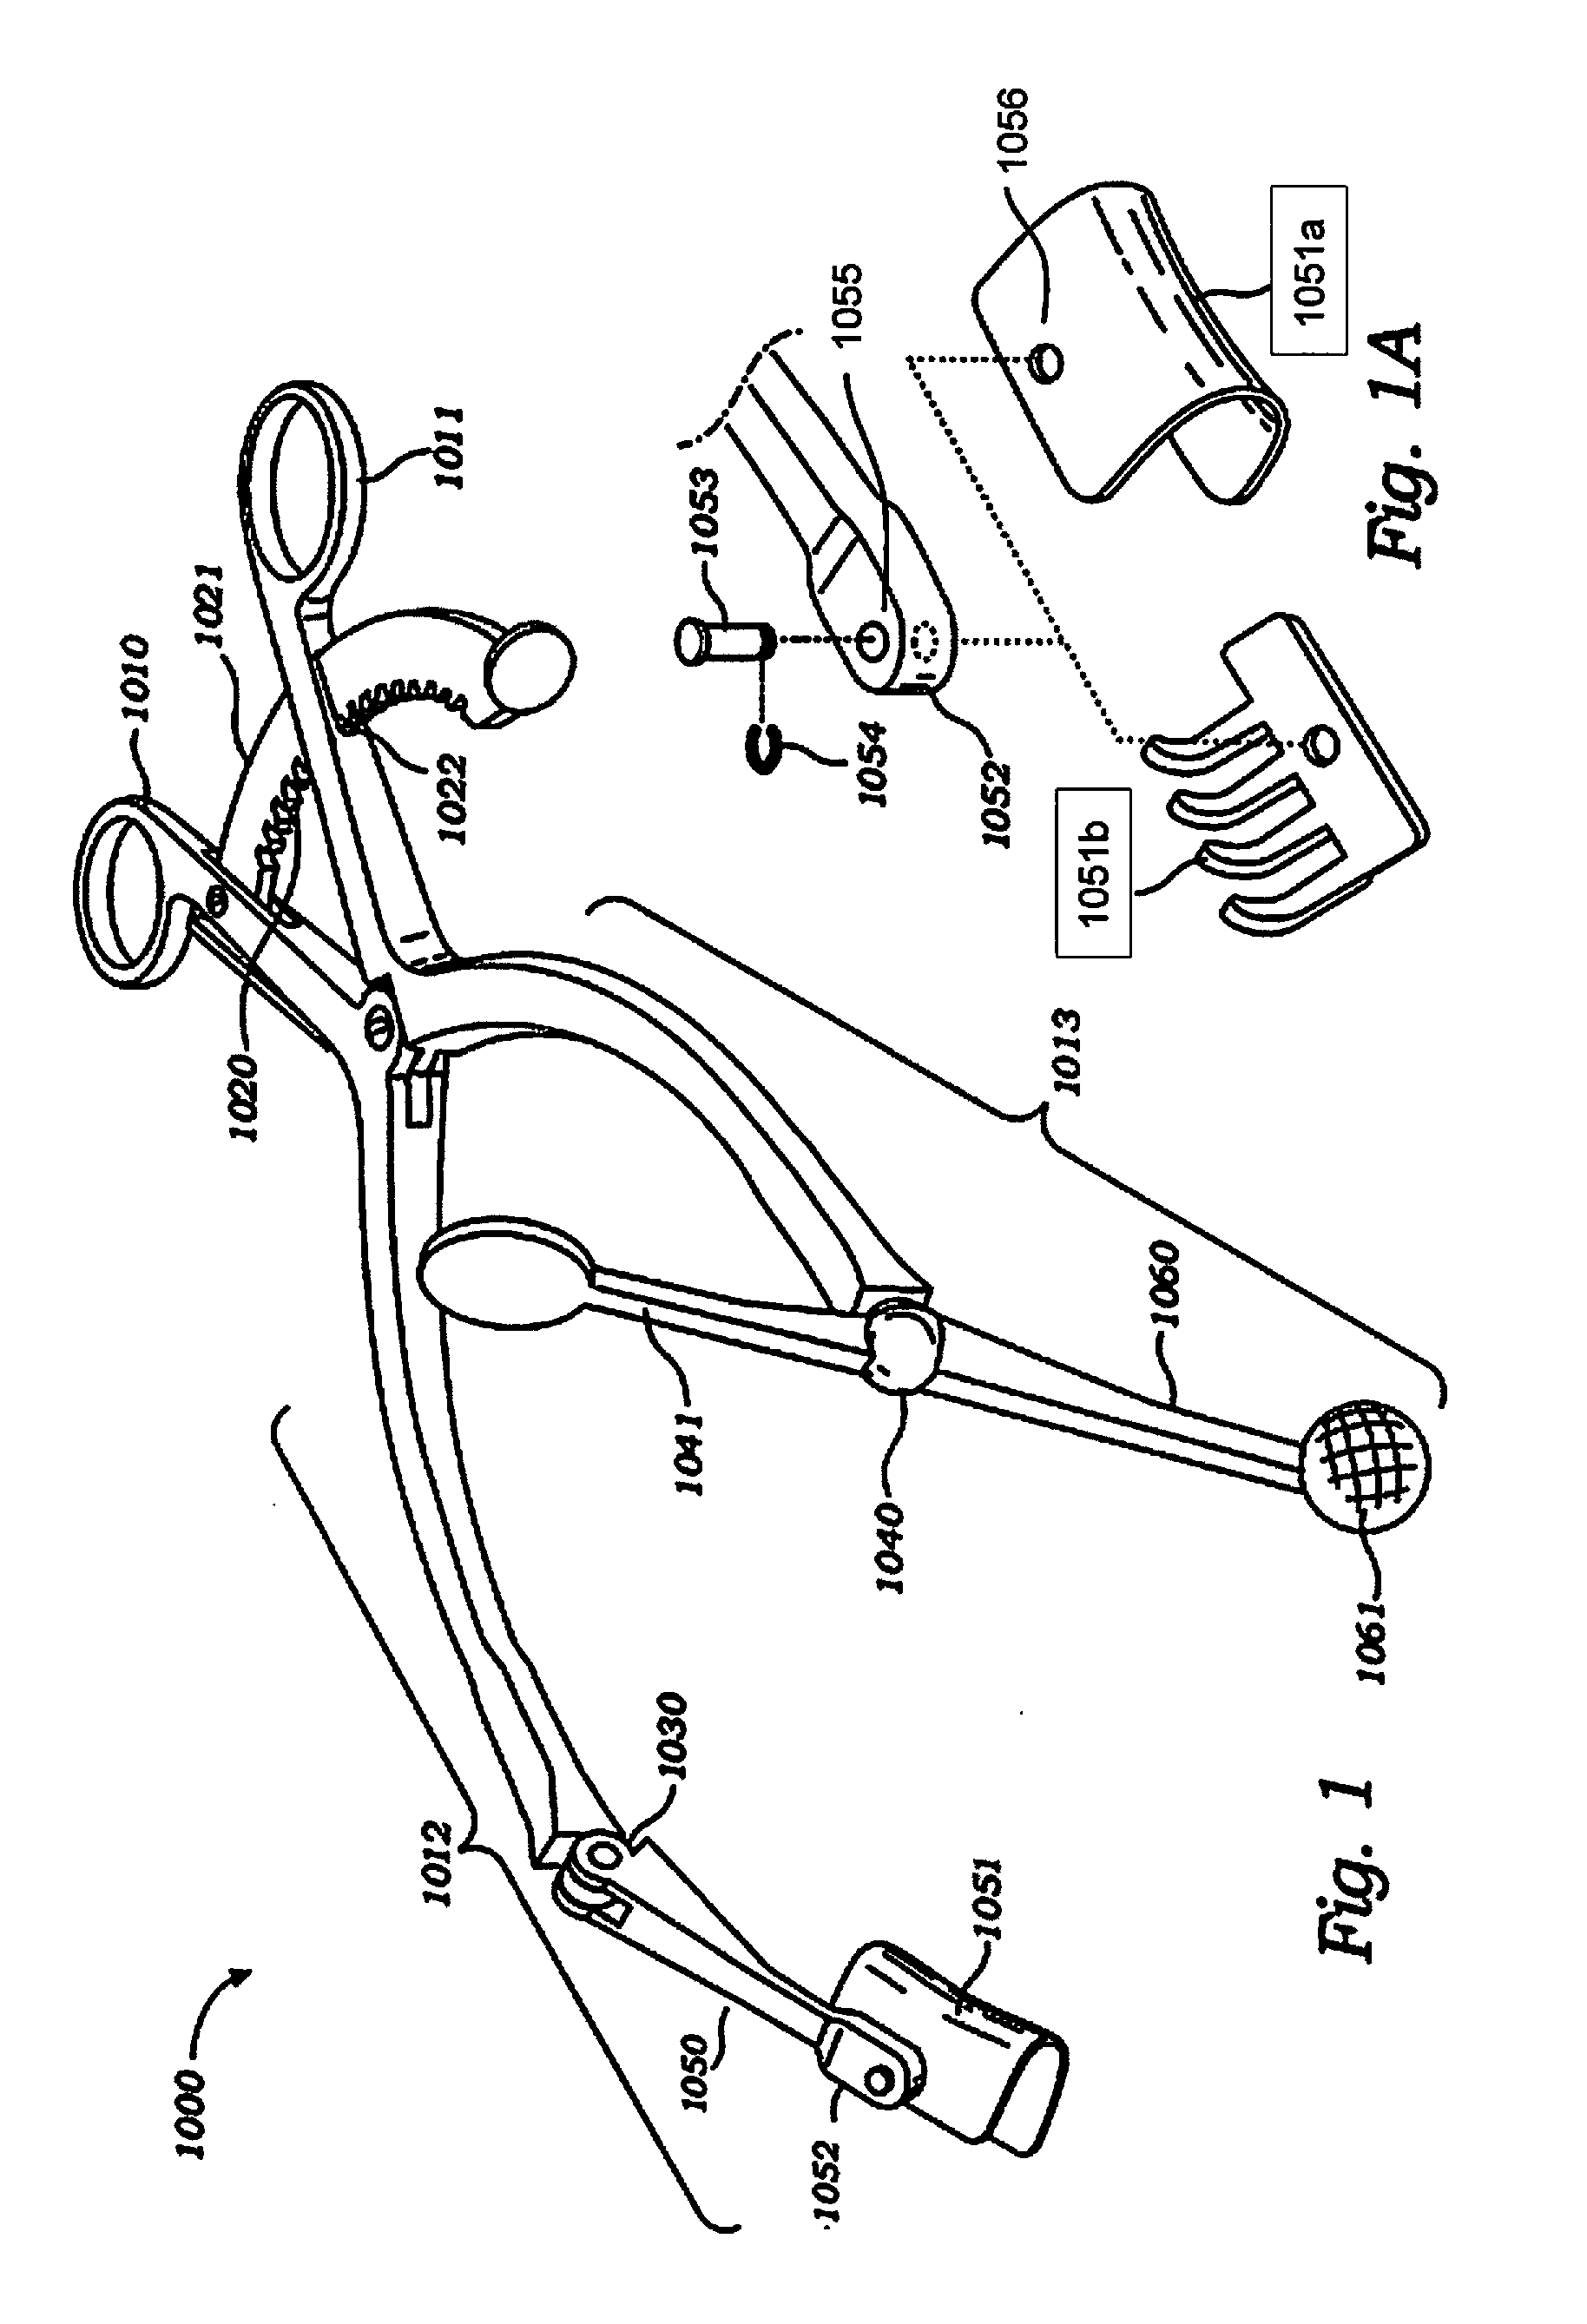 Self-retaining retractor for hip replacement surgery